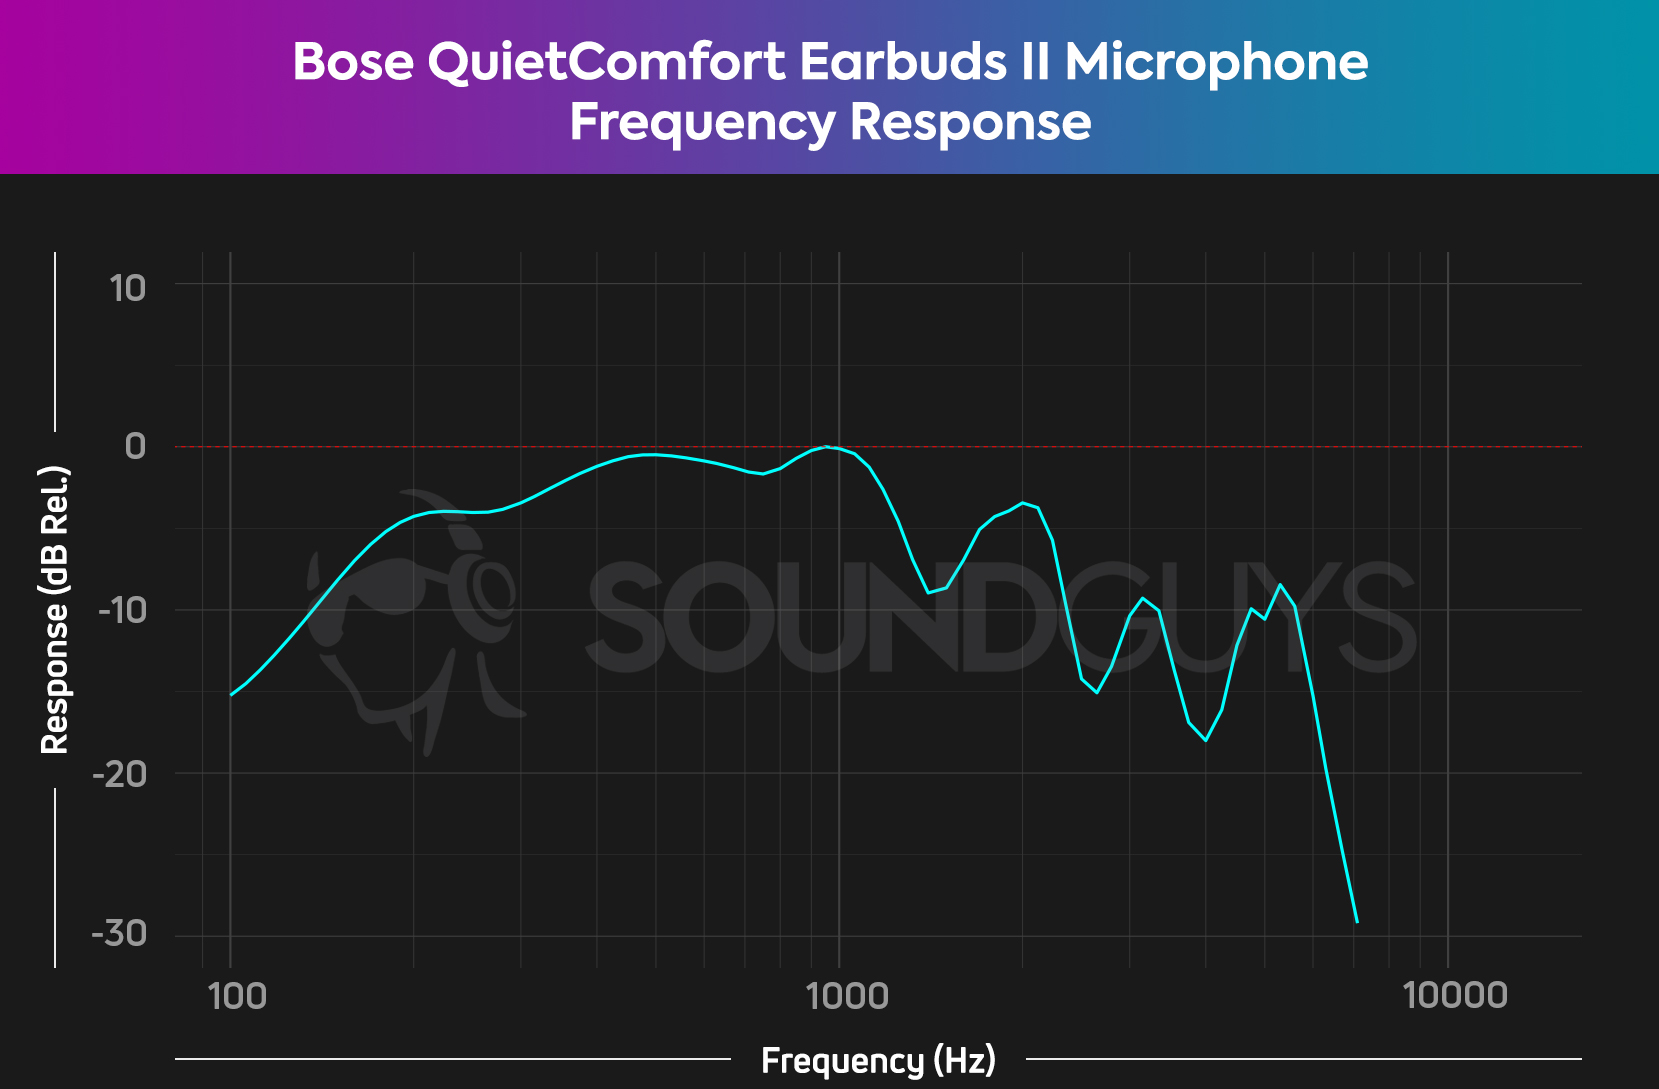 Chart shows the microphone frequency response of the Bose QuietComfort Earbuds II with under-emphasis particularly above 1000Hz.